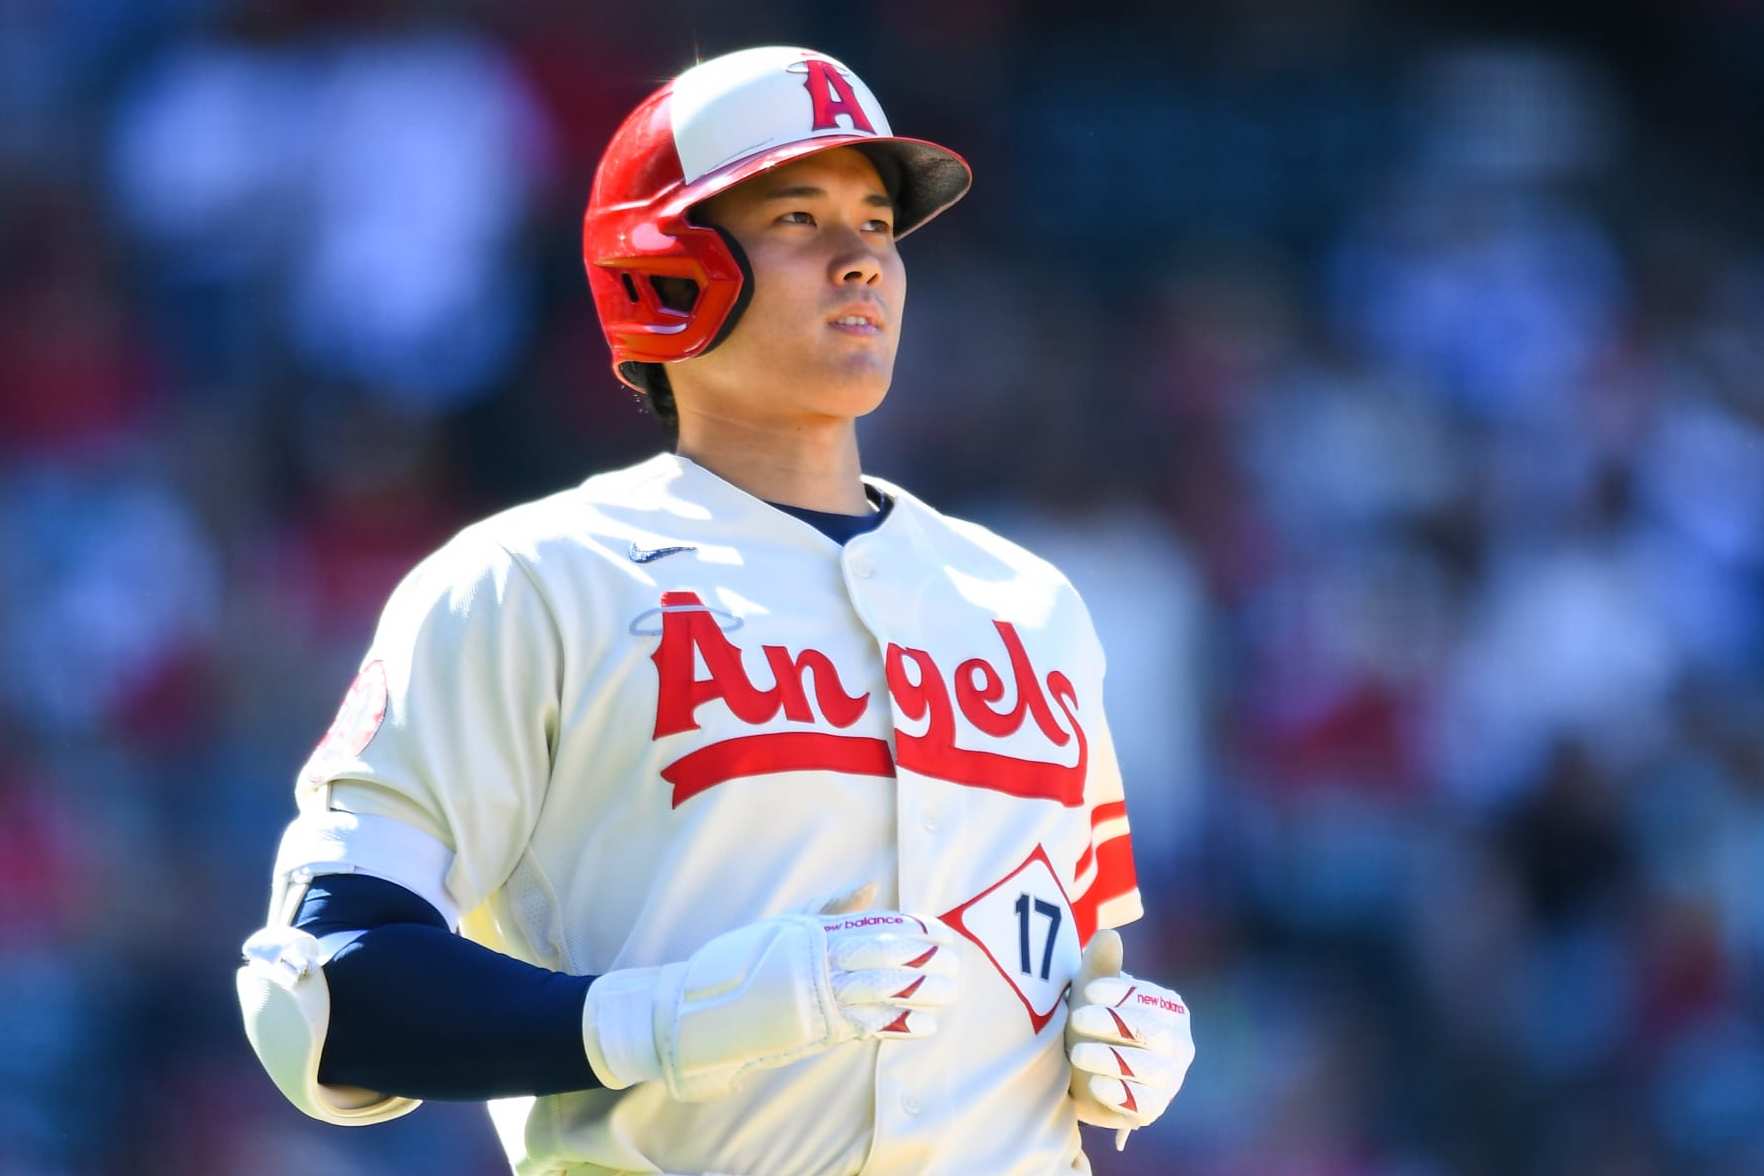 Agent hints Angels' Ohtani will explore free agency